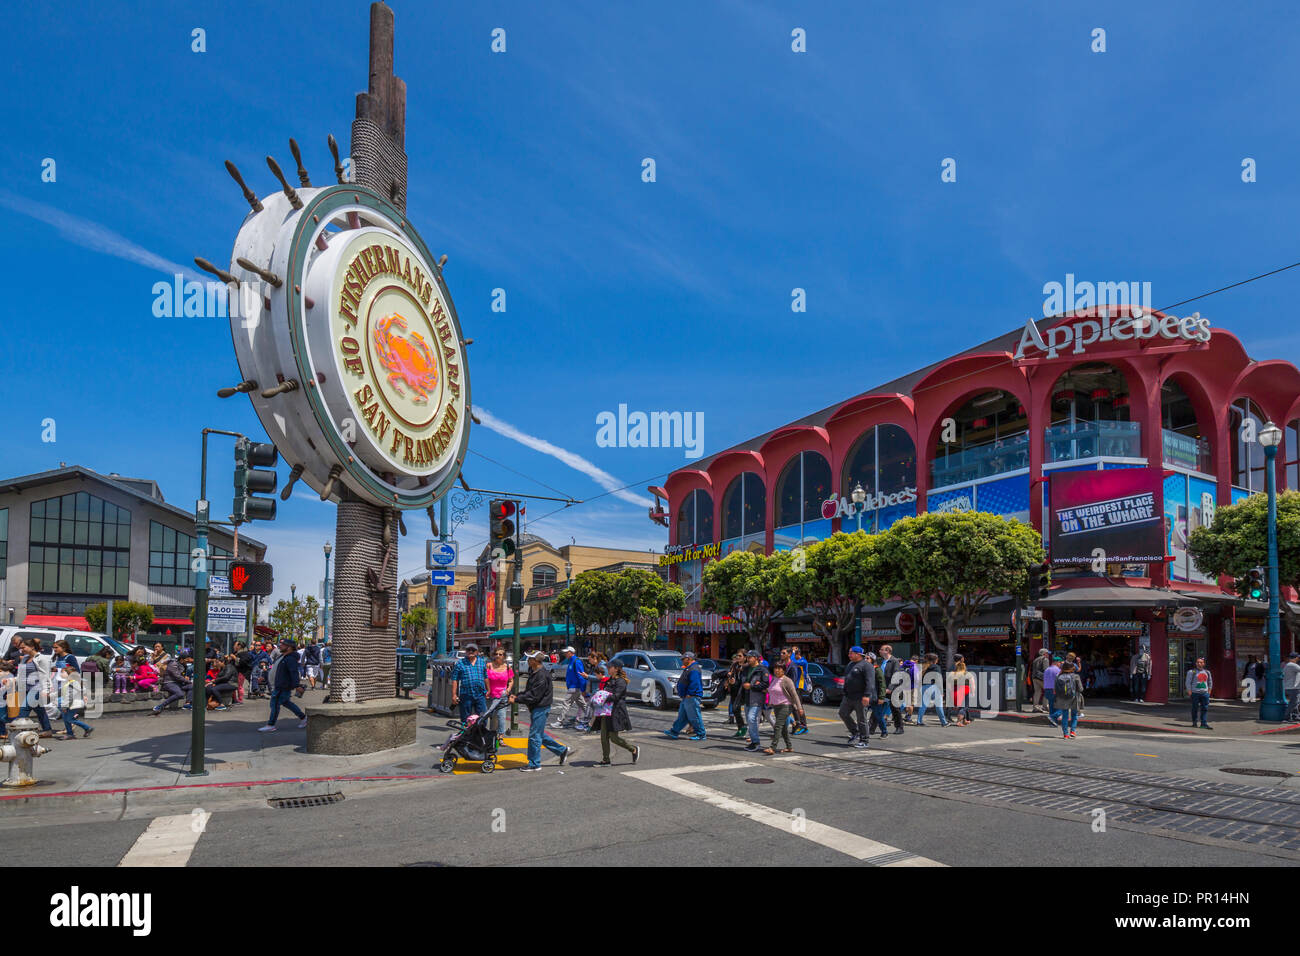 View of Fishermans Wharf sign, San Francisco, California, United States of America, North America Stock Photo